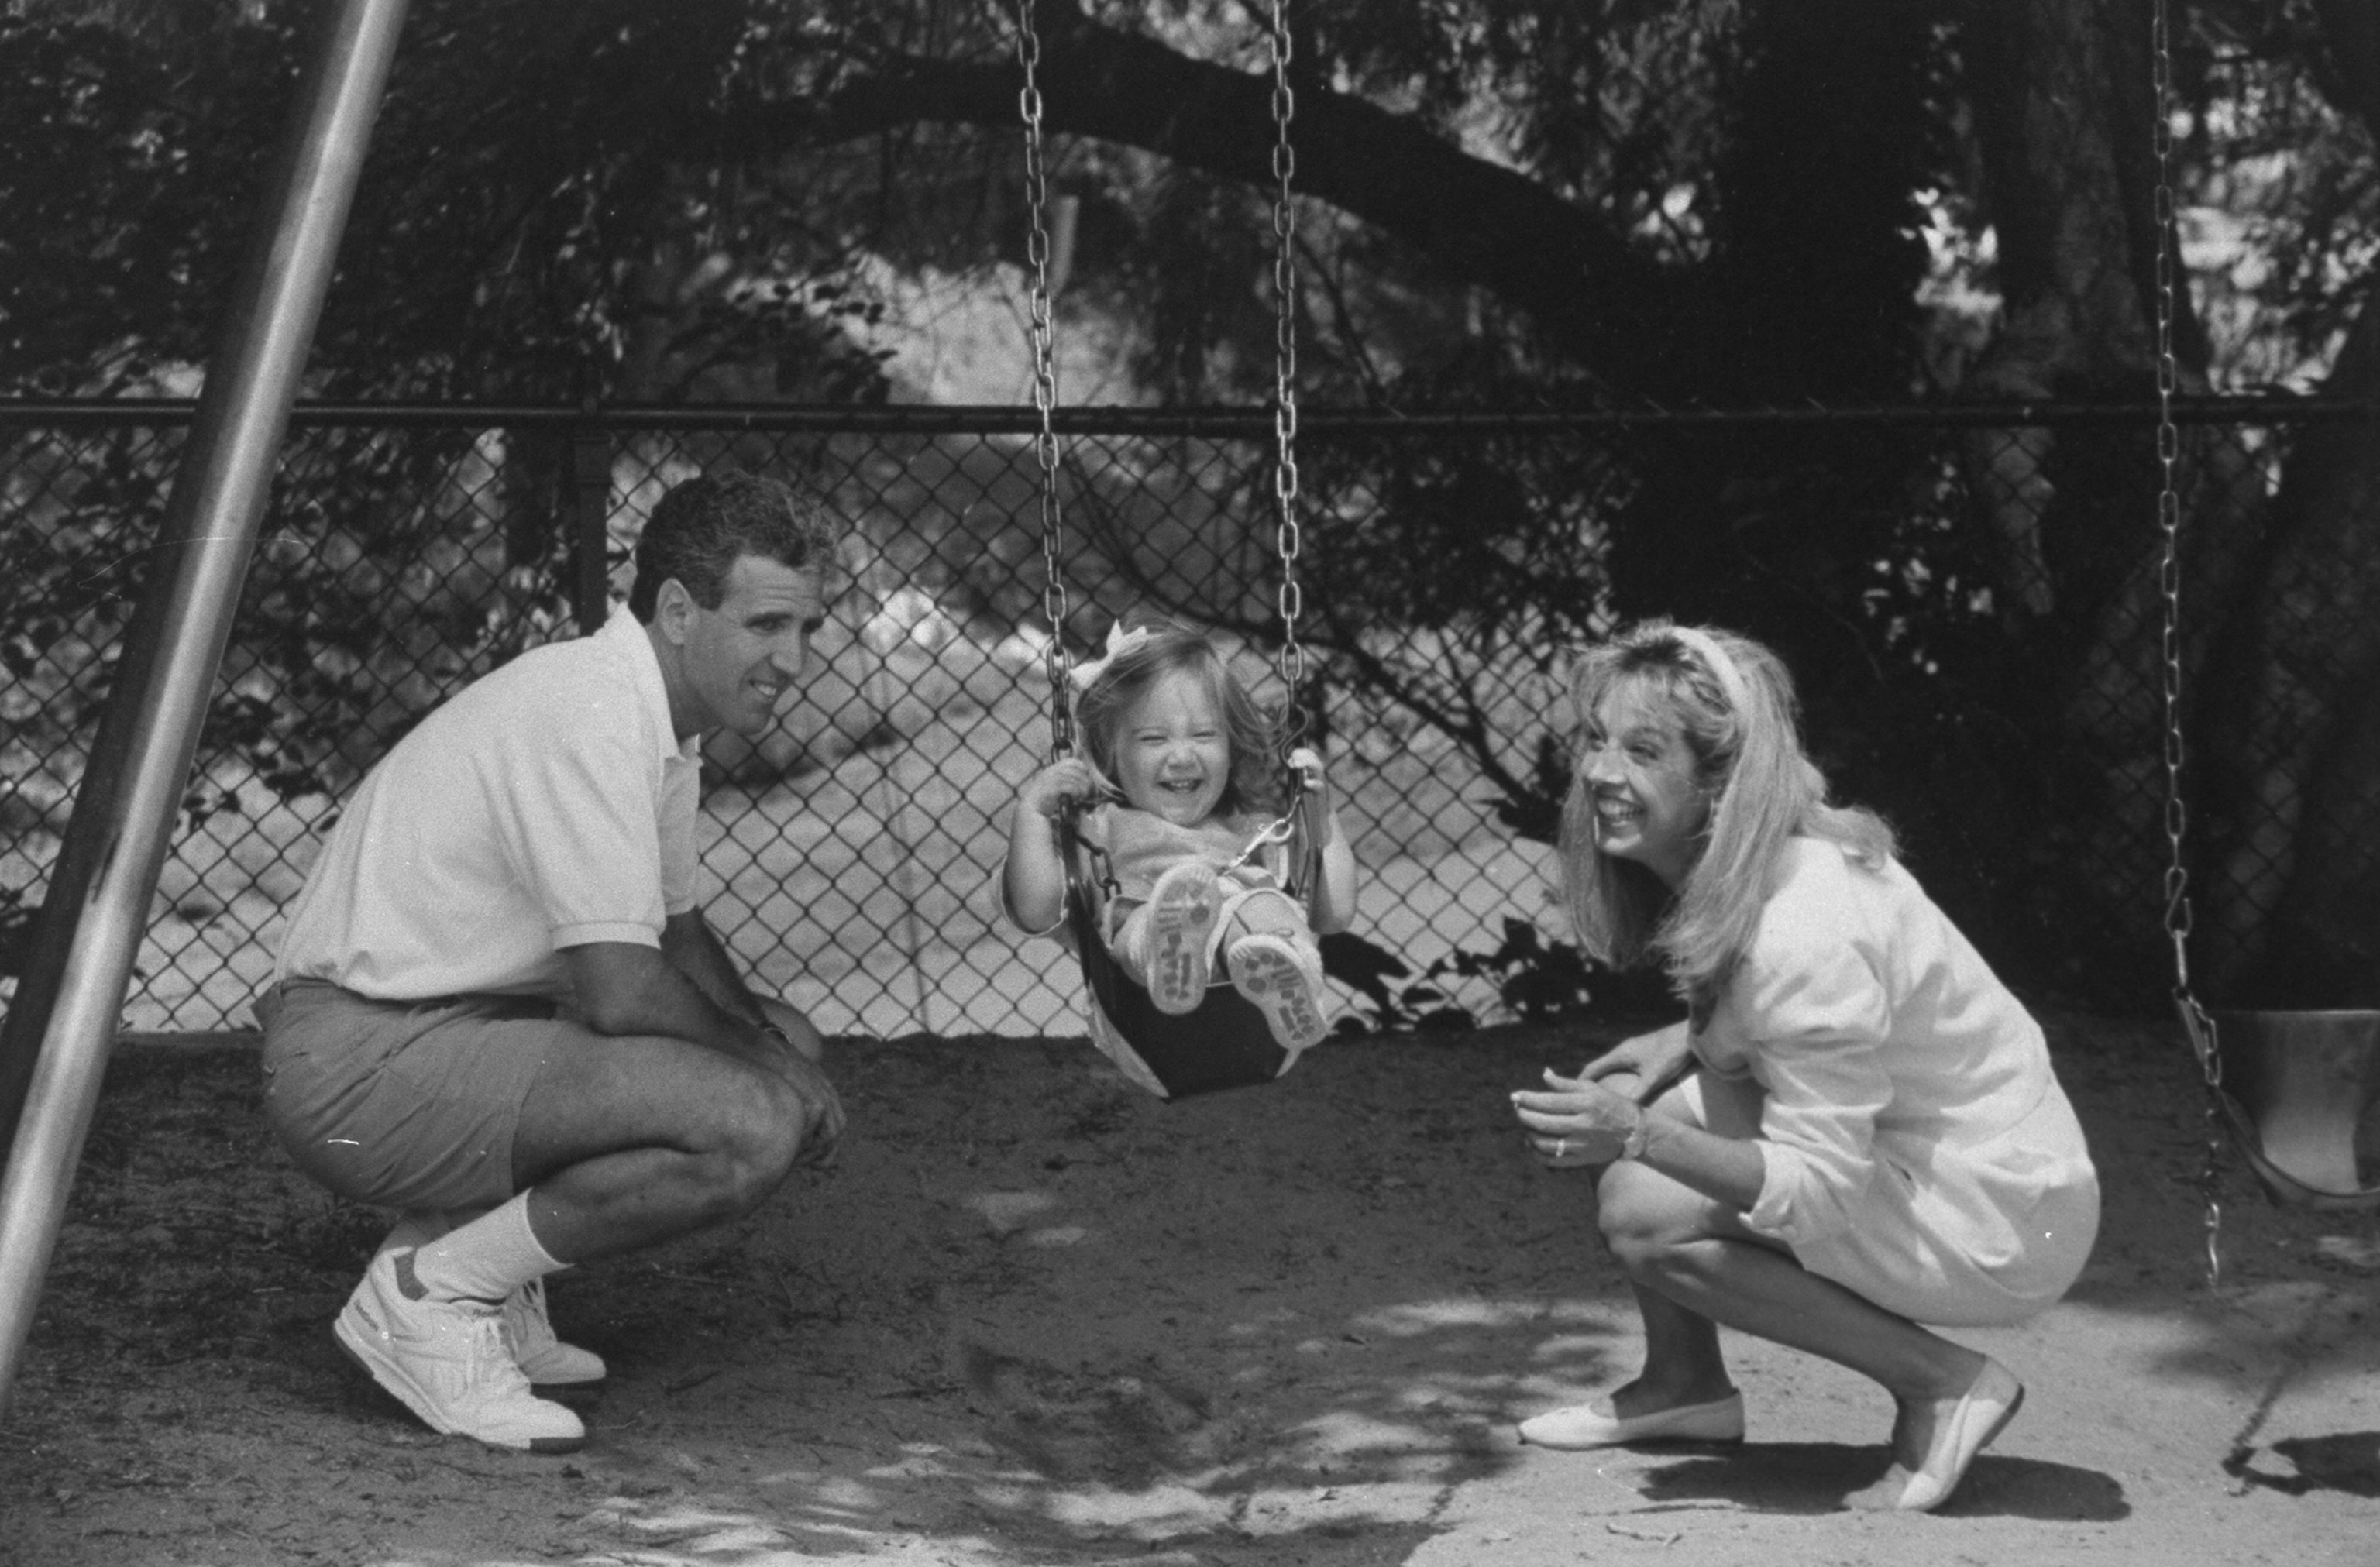 Denise Austin, Jeff Austin and their 21-month-old daughter, Kelly, on a swing in a park near their home, June 3, 1992 |  Source: Getty Images